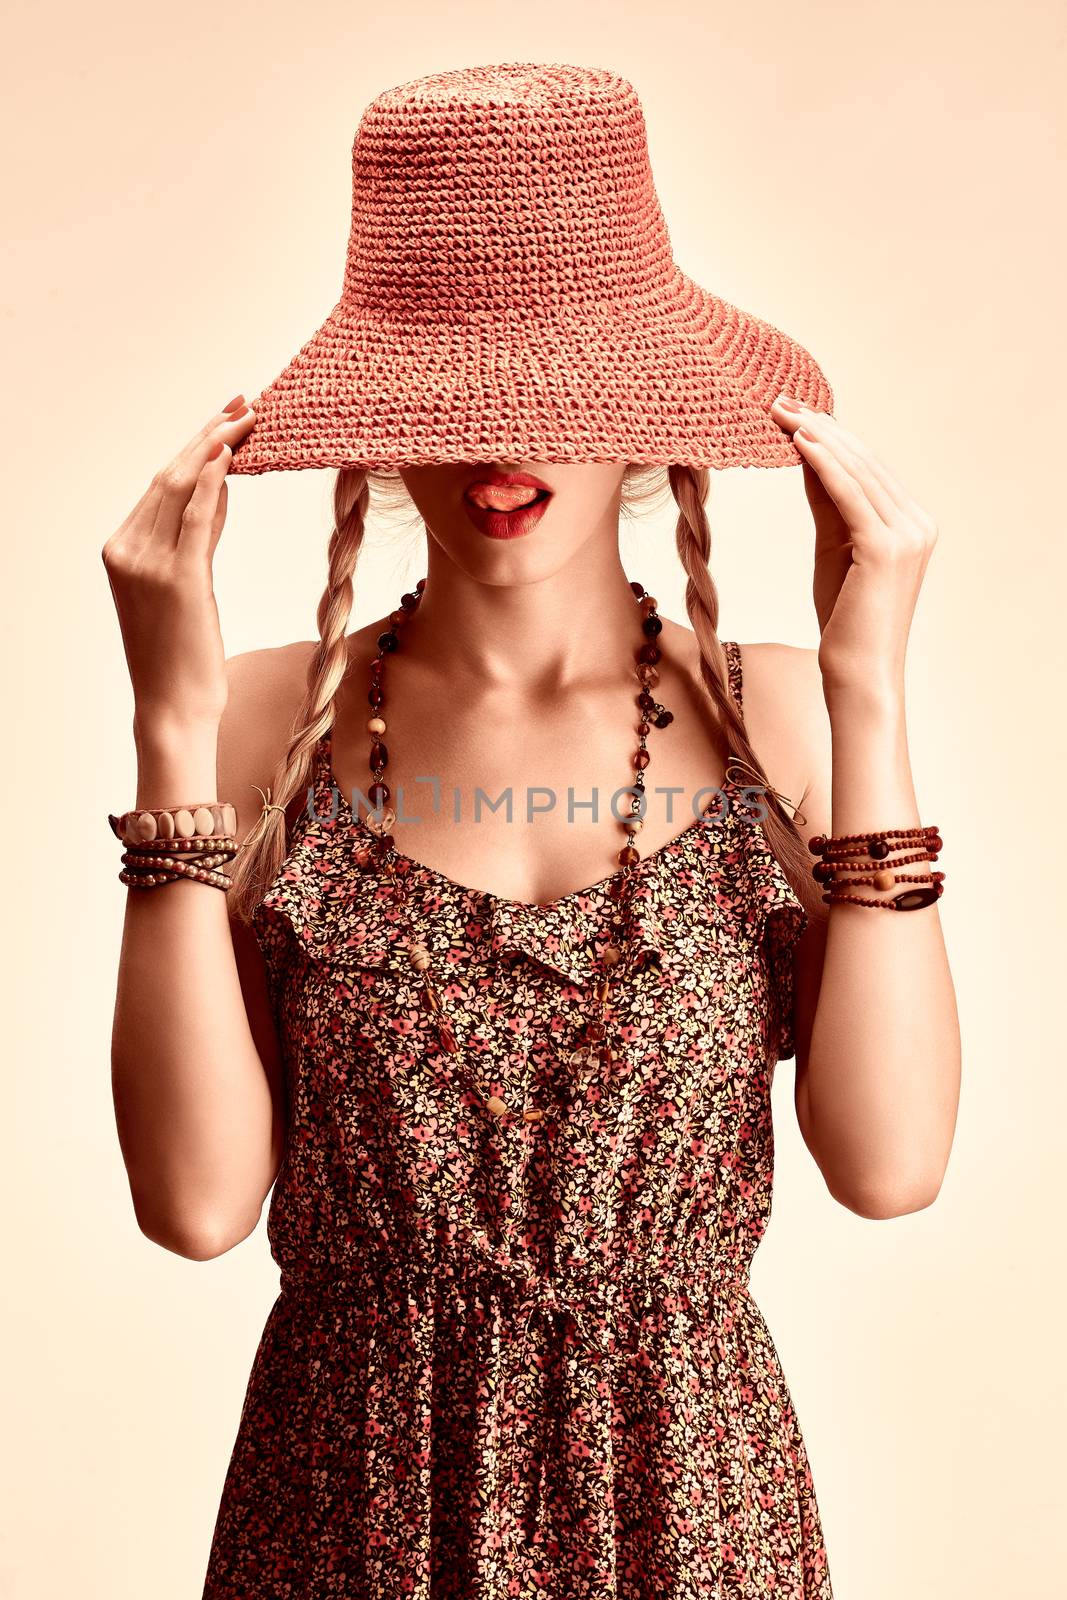 Beauty  playful boho slim woman in orange hat licking lips, romantic style, people. Hippie young joyful girl with blonde pigtails in floral fashion sundress happy, having fun. Summer look. Toned 